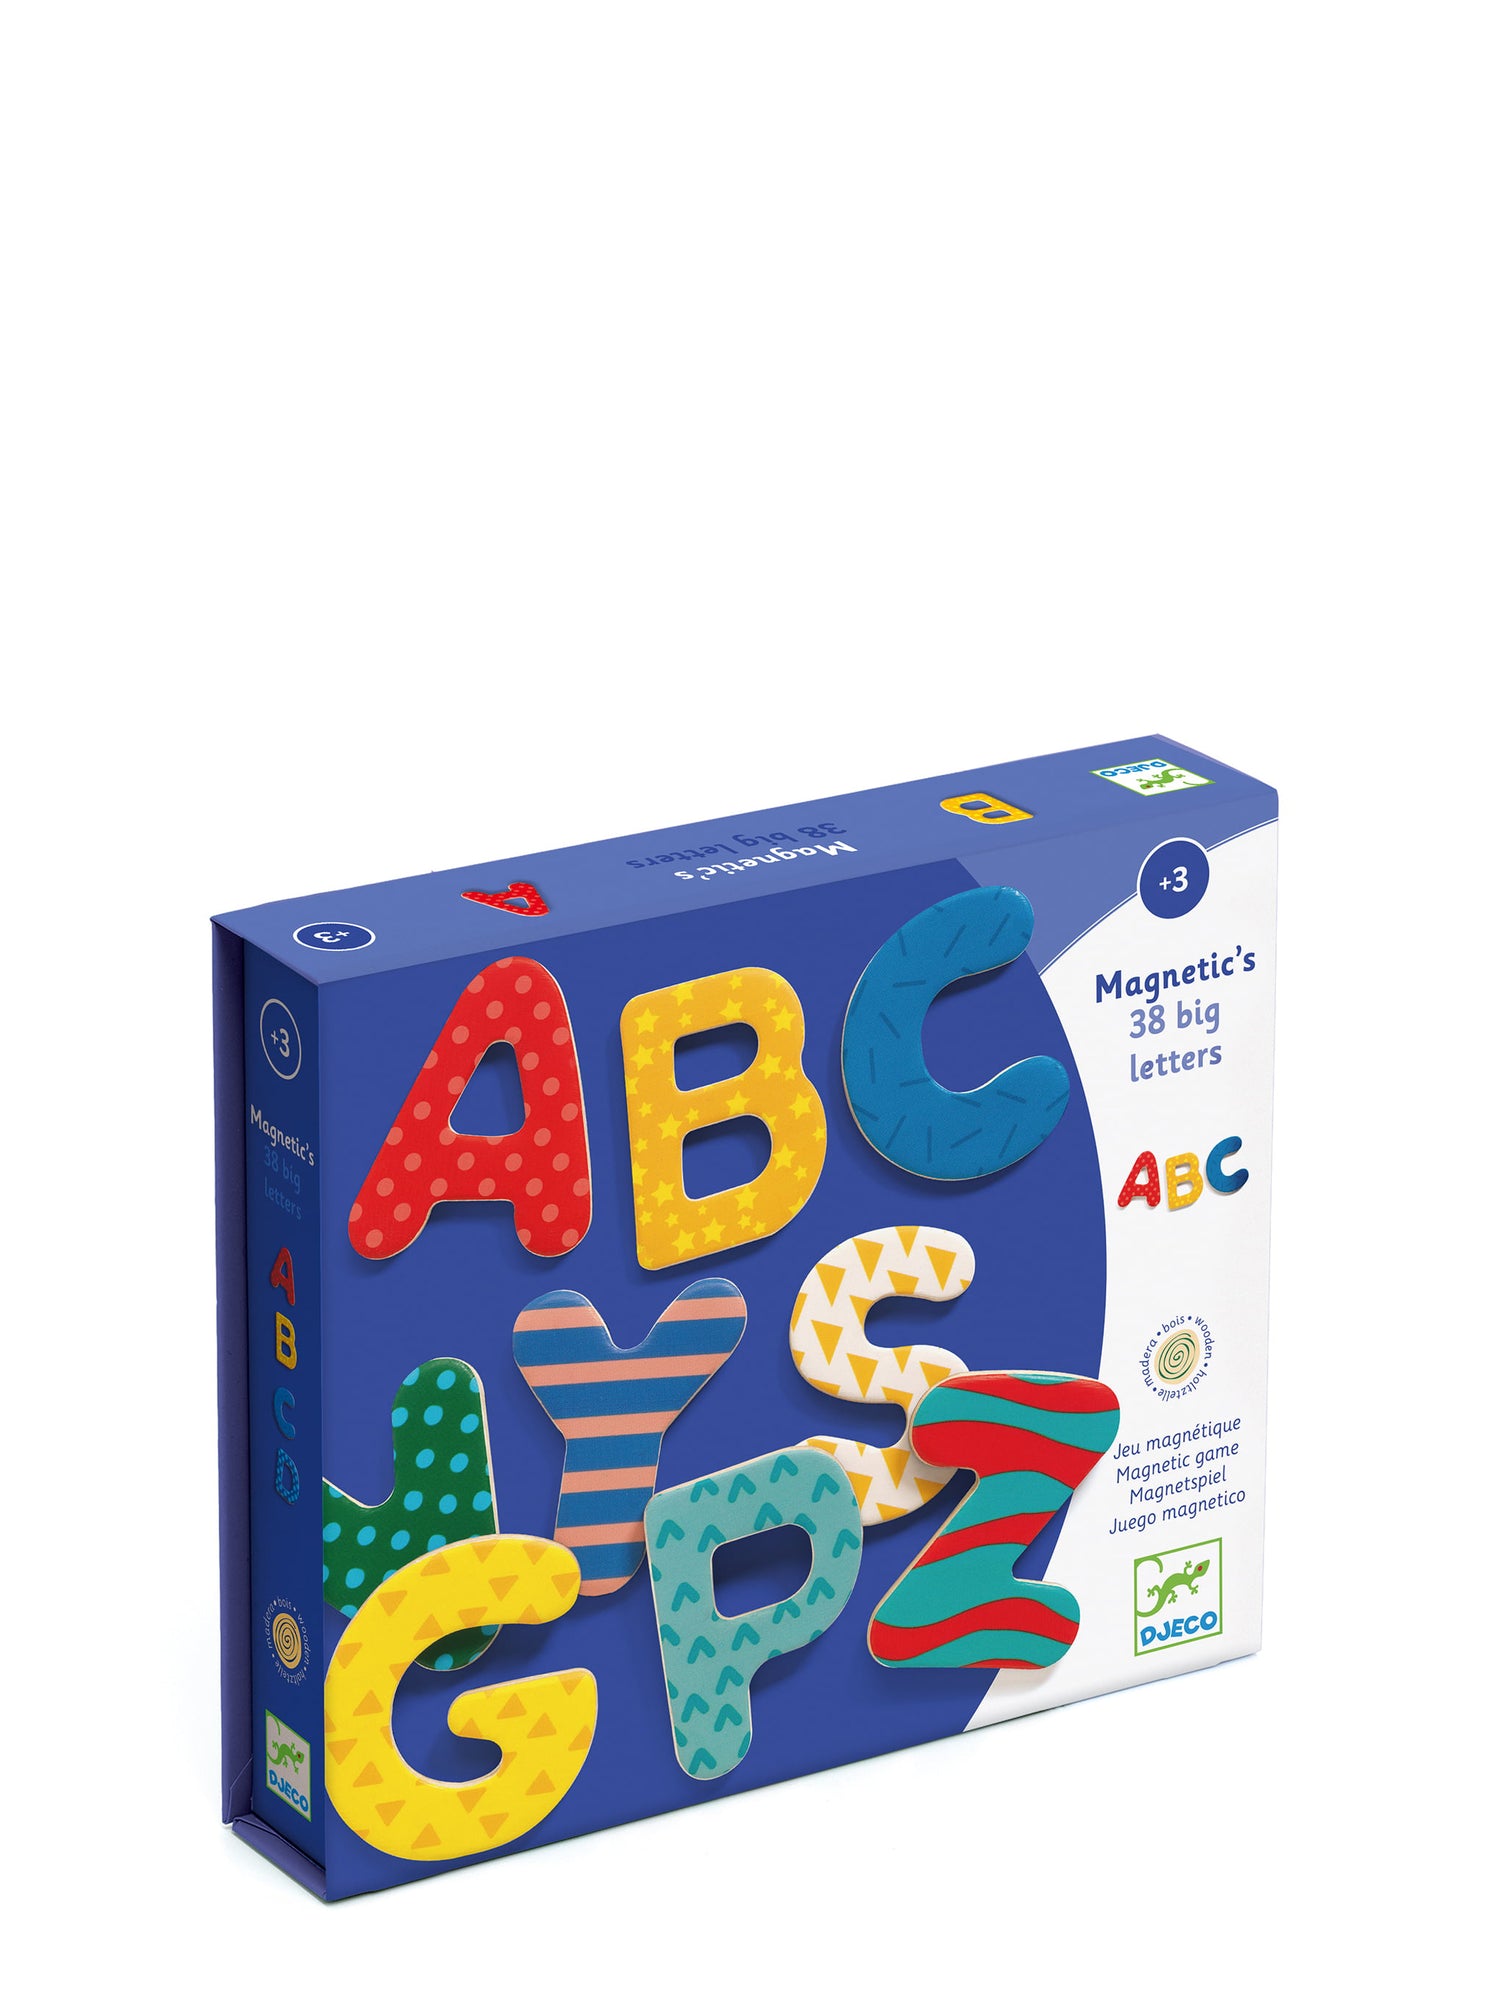 38 big magnetic letters